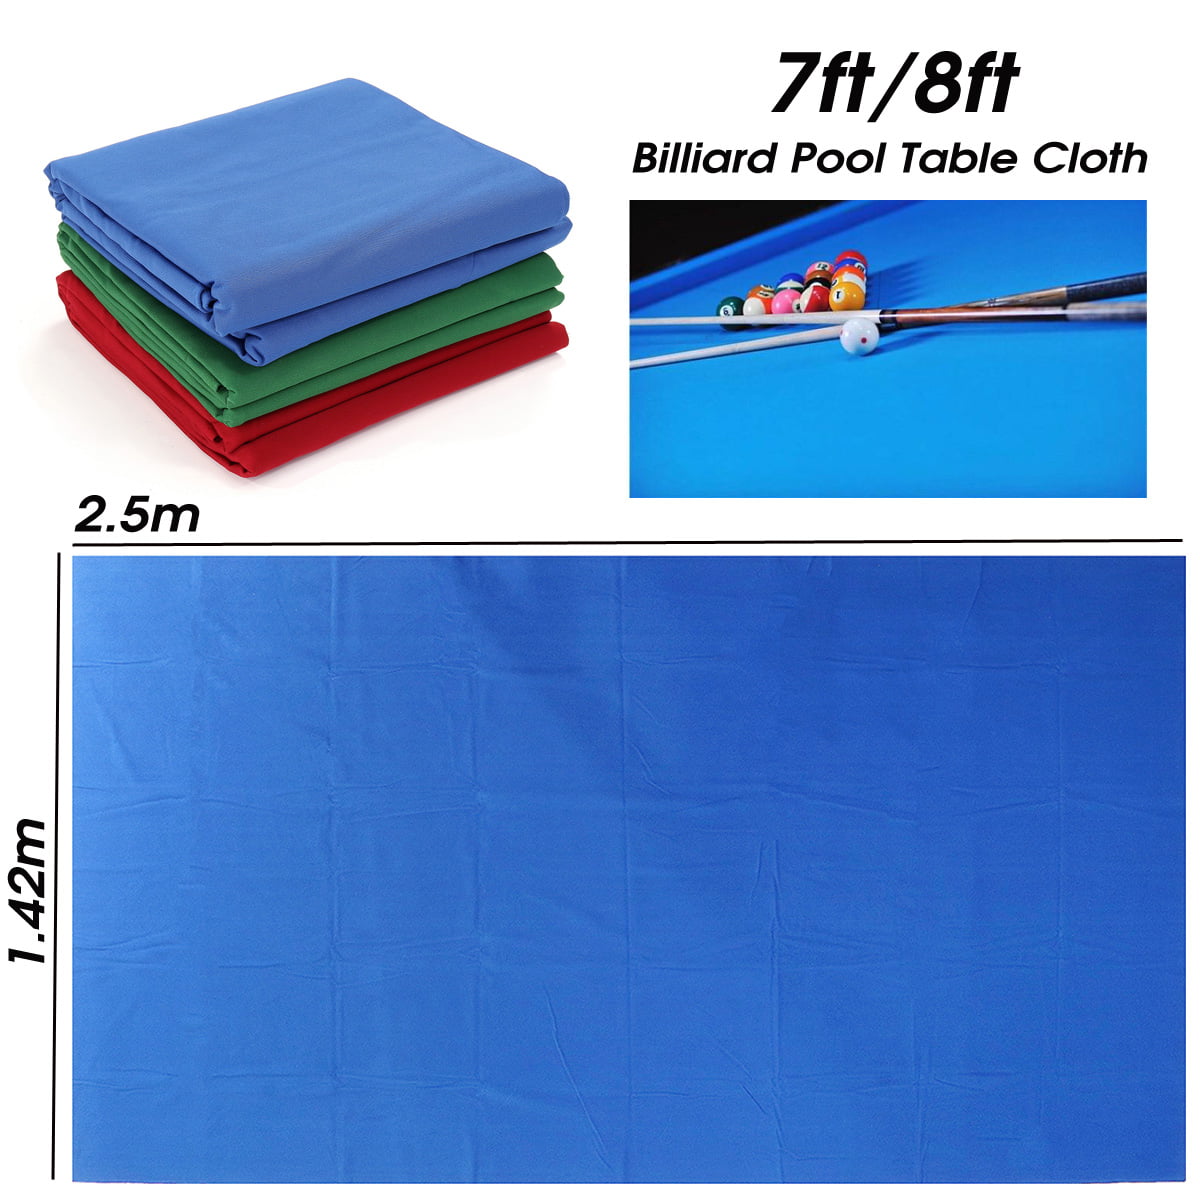 New Pro Form Worsted Pool Table Cloth for 7ft Table High Speed Billiard Felt 